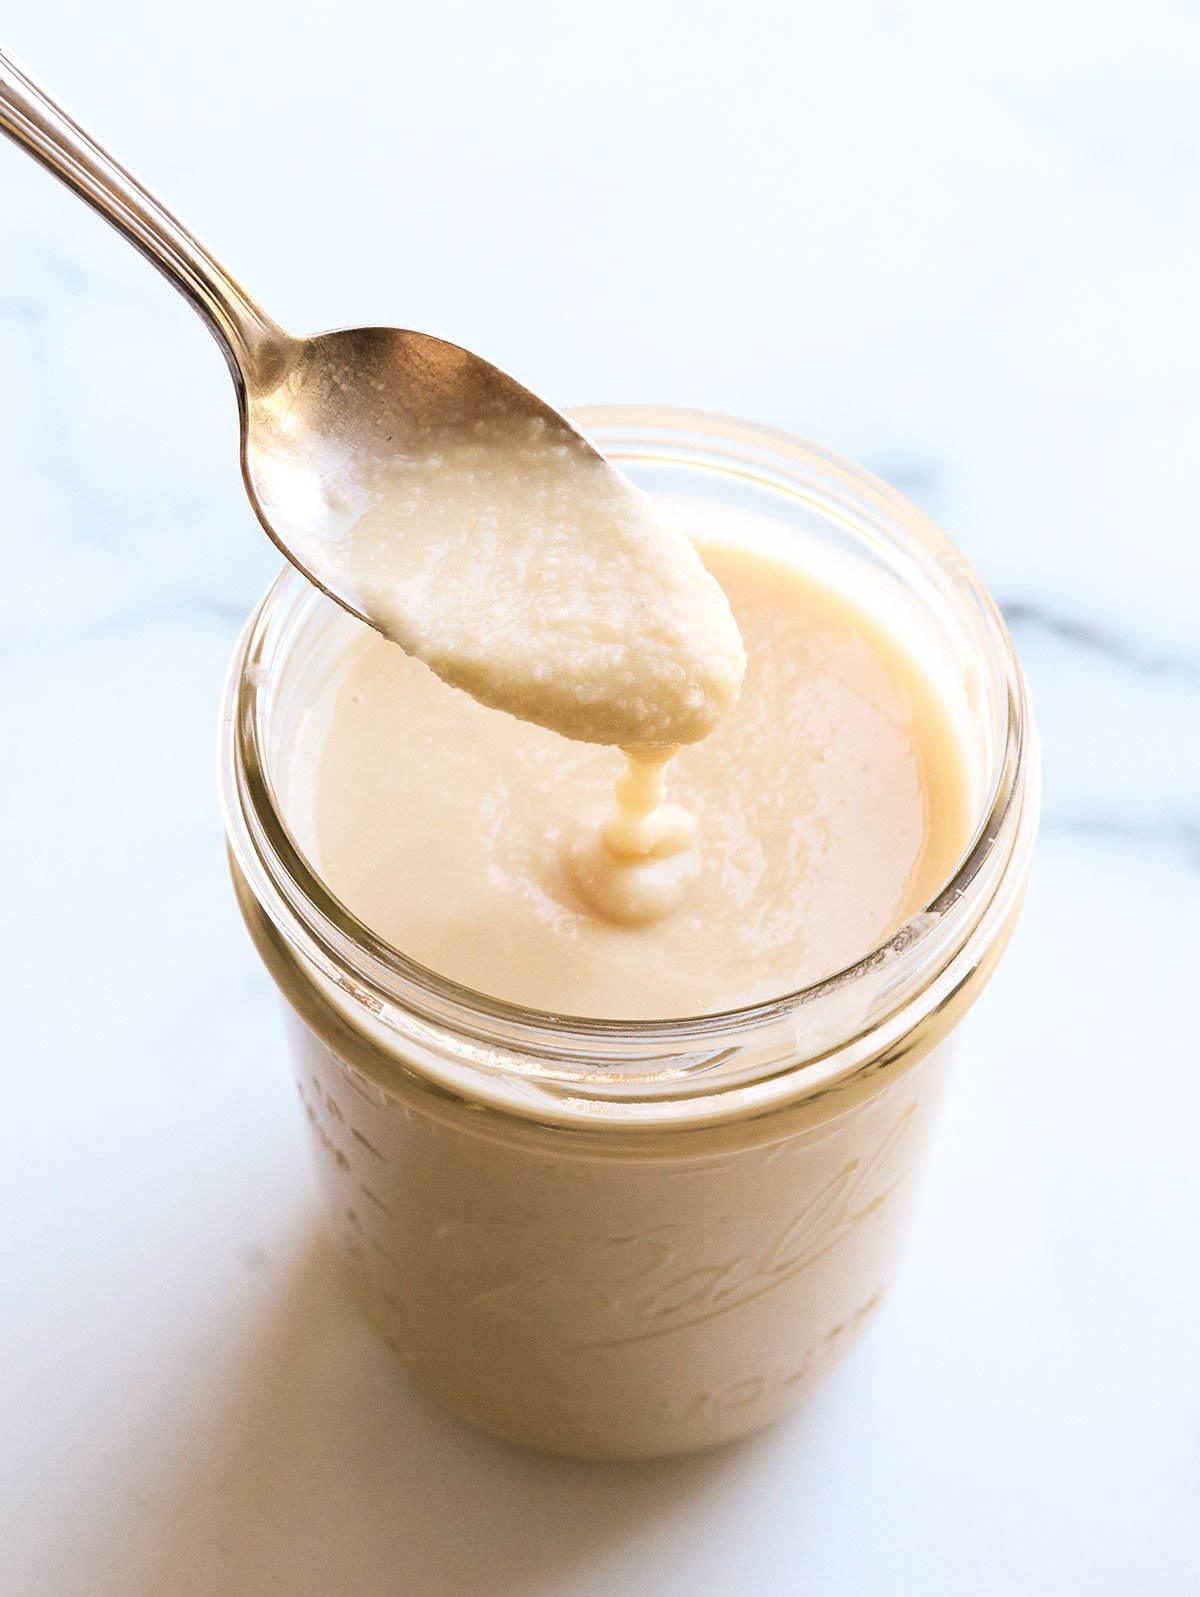 homemade coconut butter dripping off of a spoon into a jar.